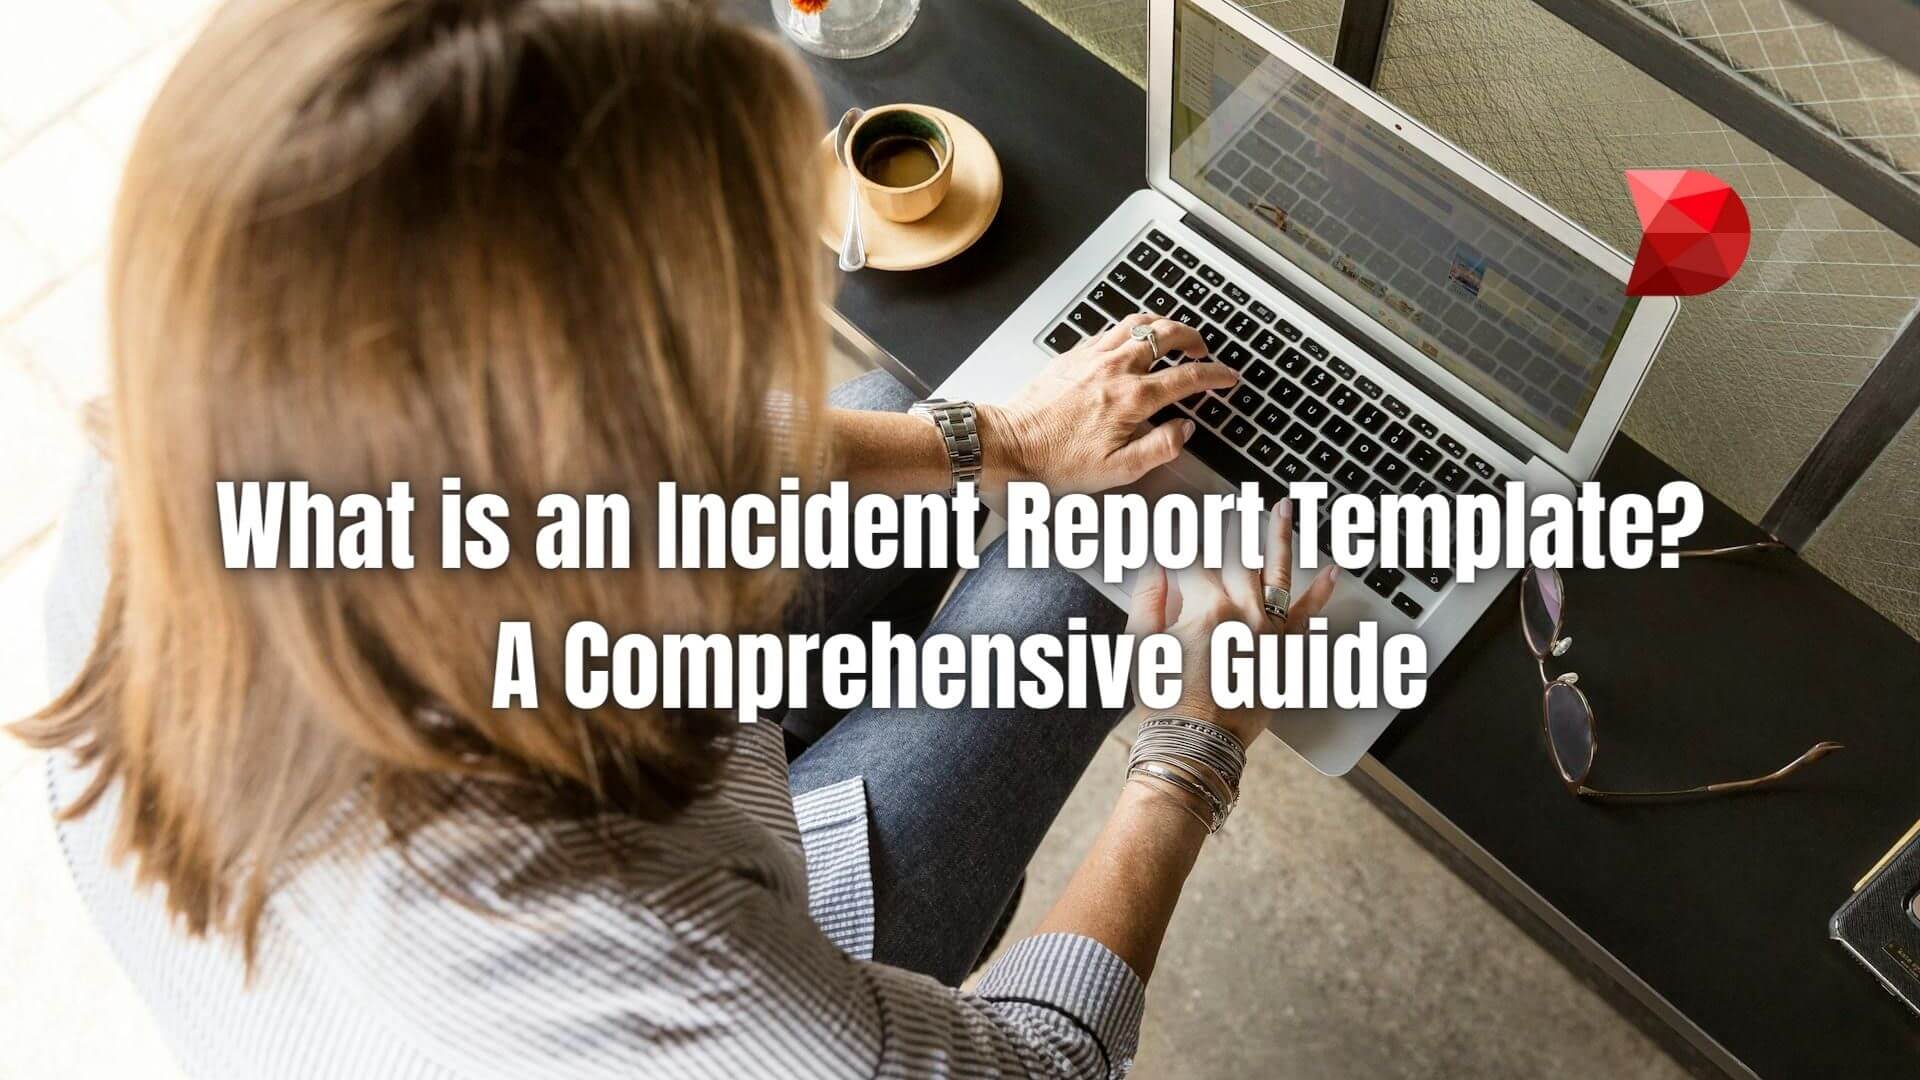 Efficient incident reporting starts with the right templates. Learn how to create and utilize them effectively with this comprehensive guide.